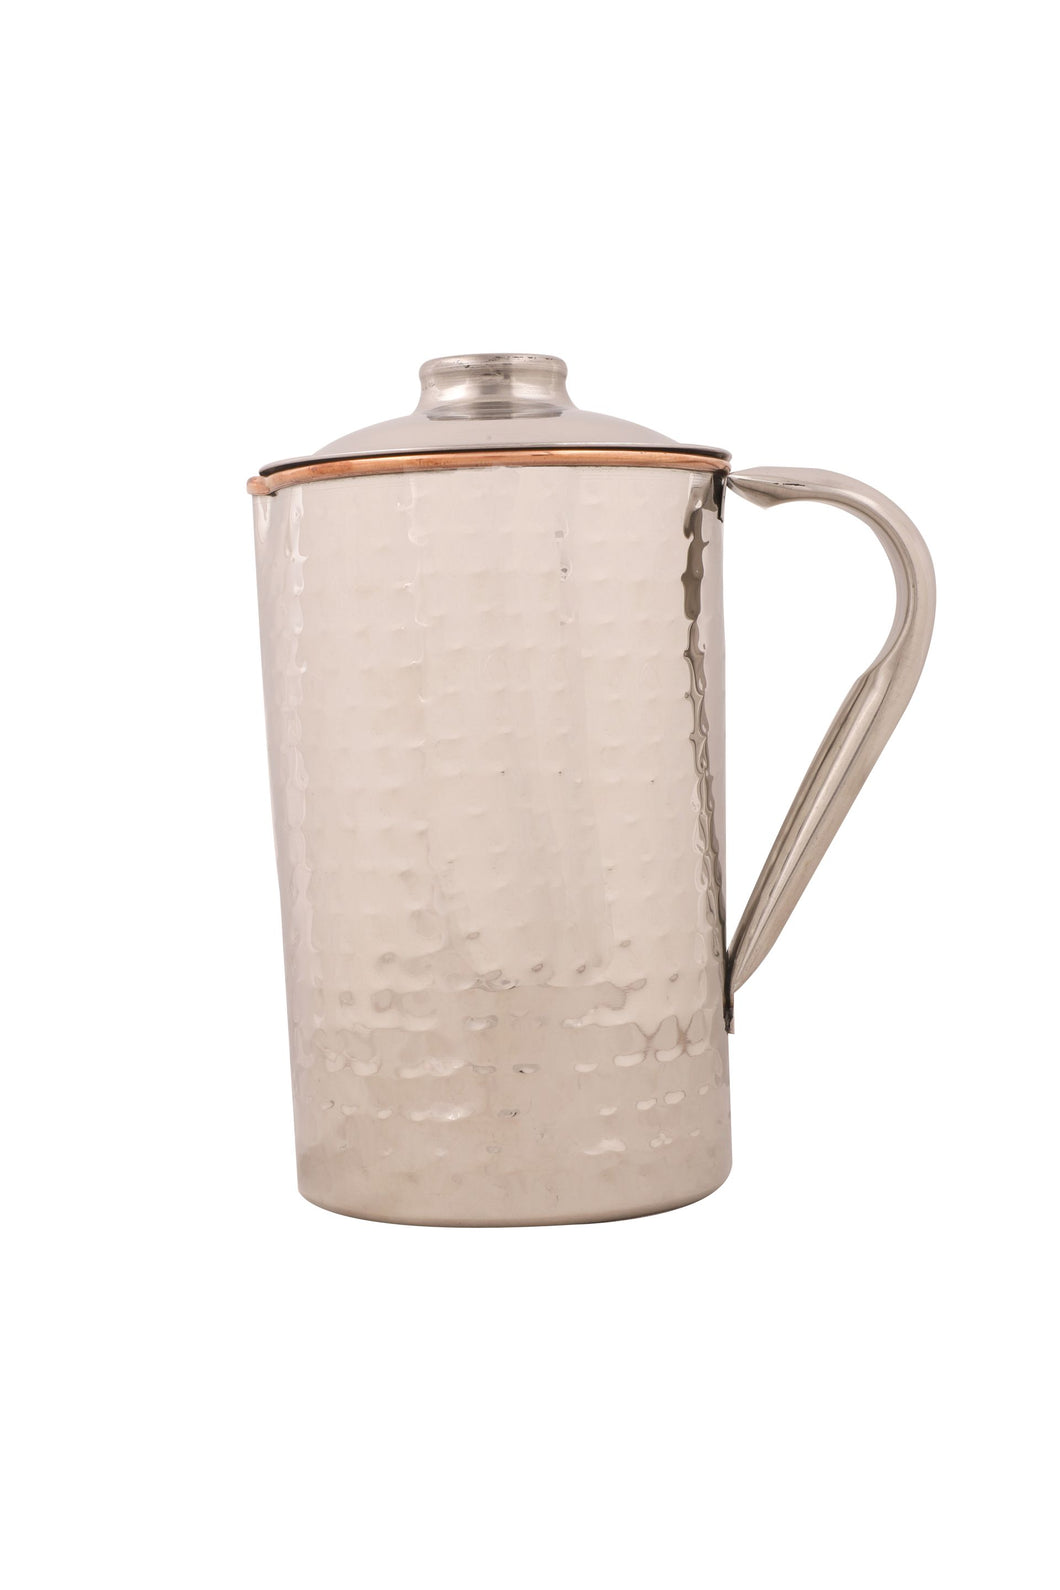 Stainless Steel/Copper Hammered Jug Pitcher - 1.6 Liters